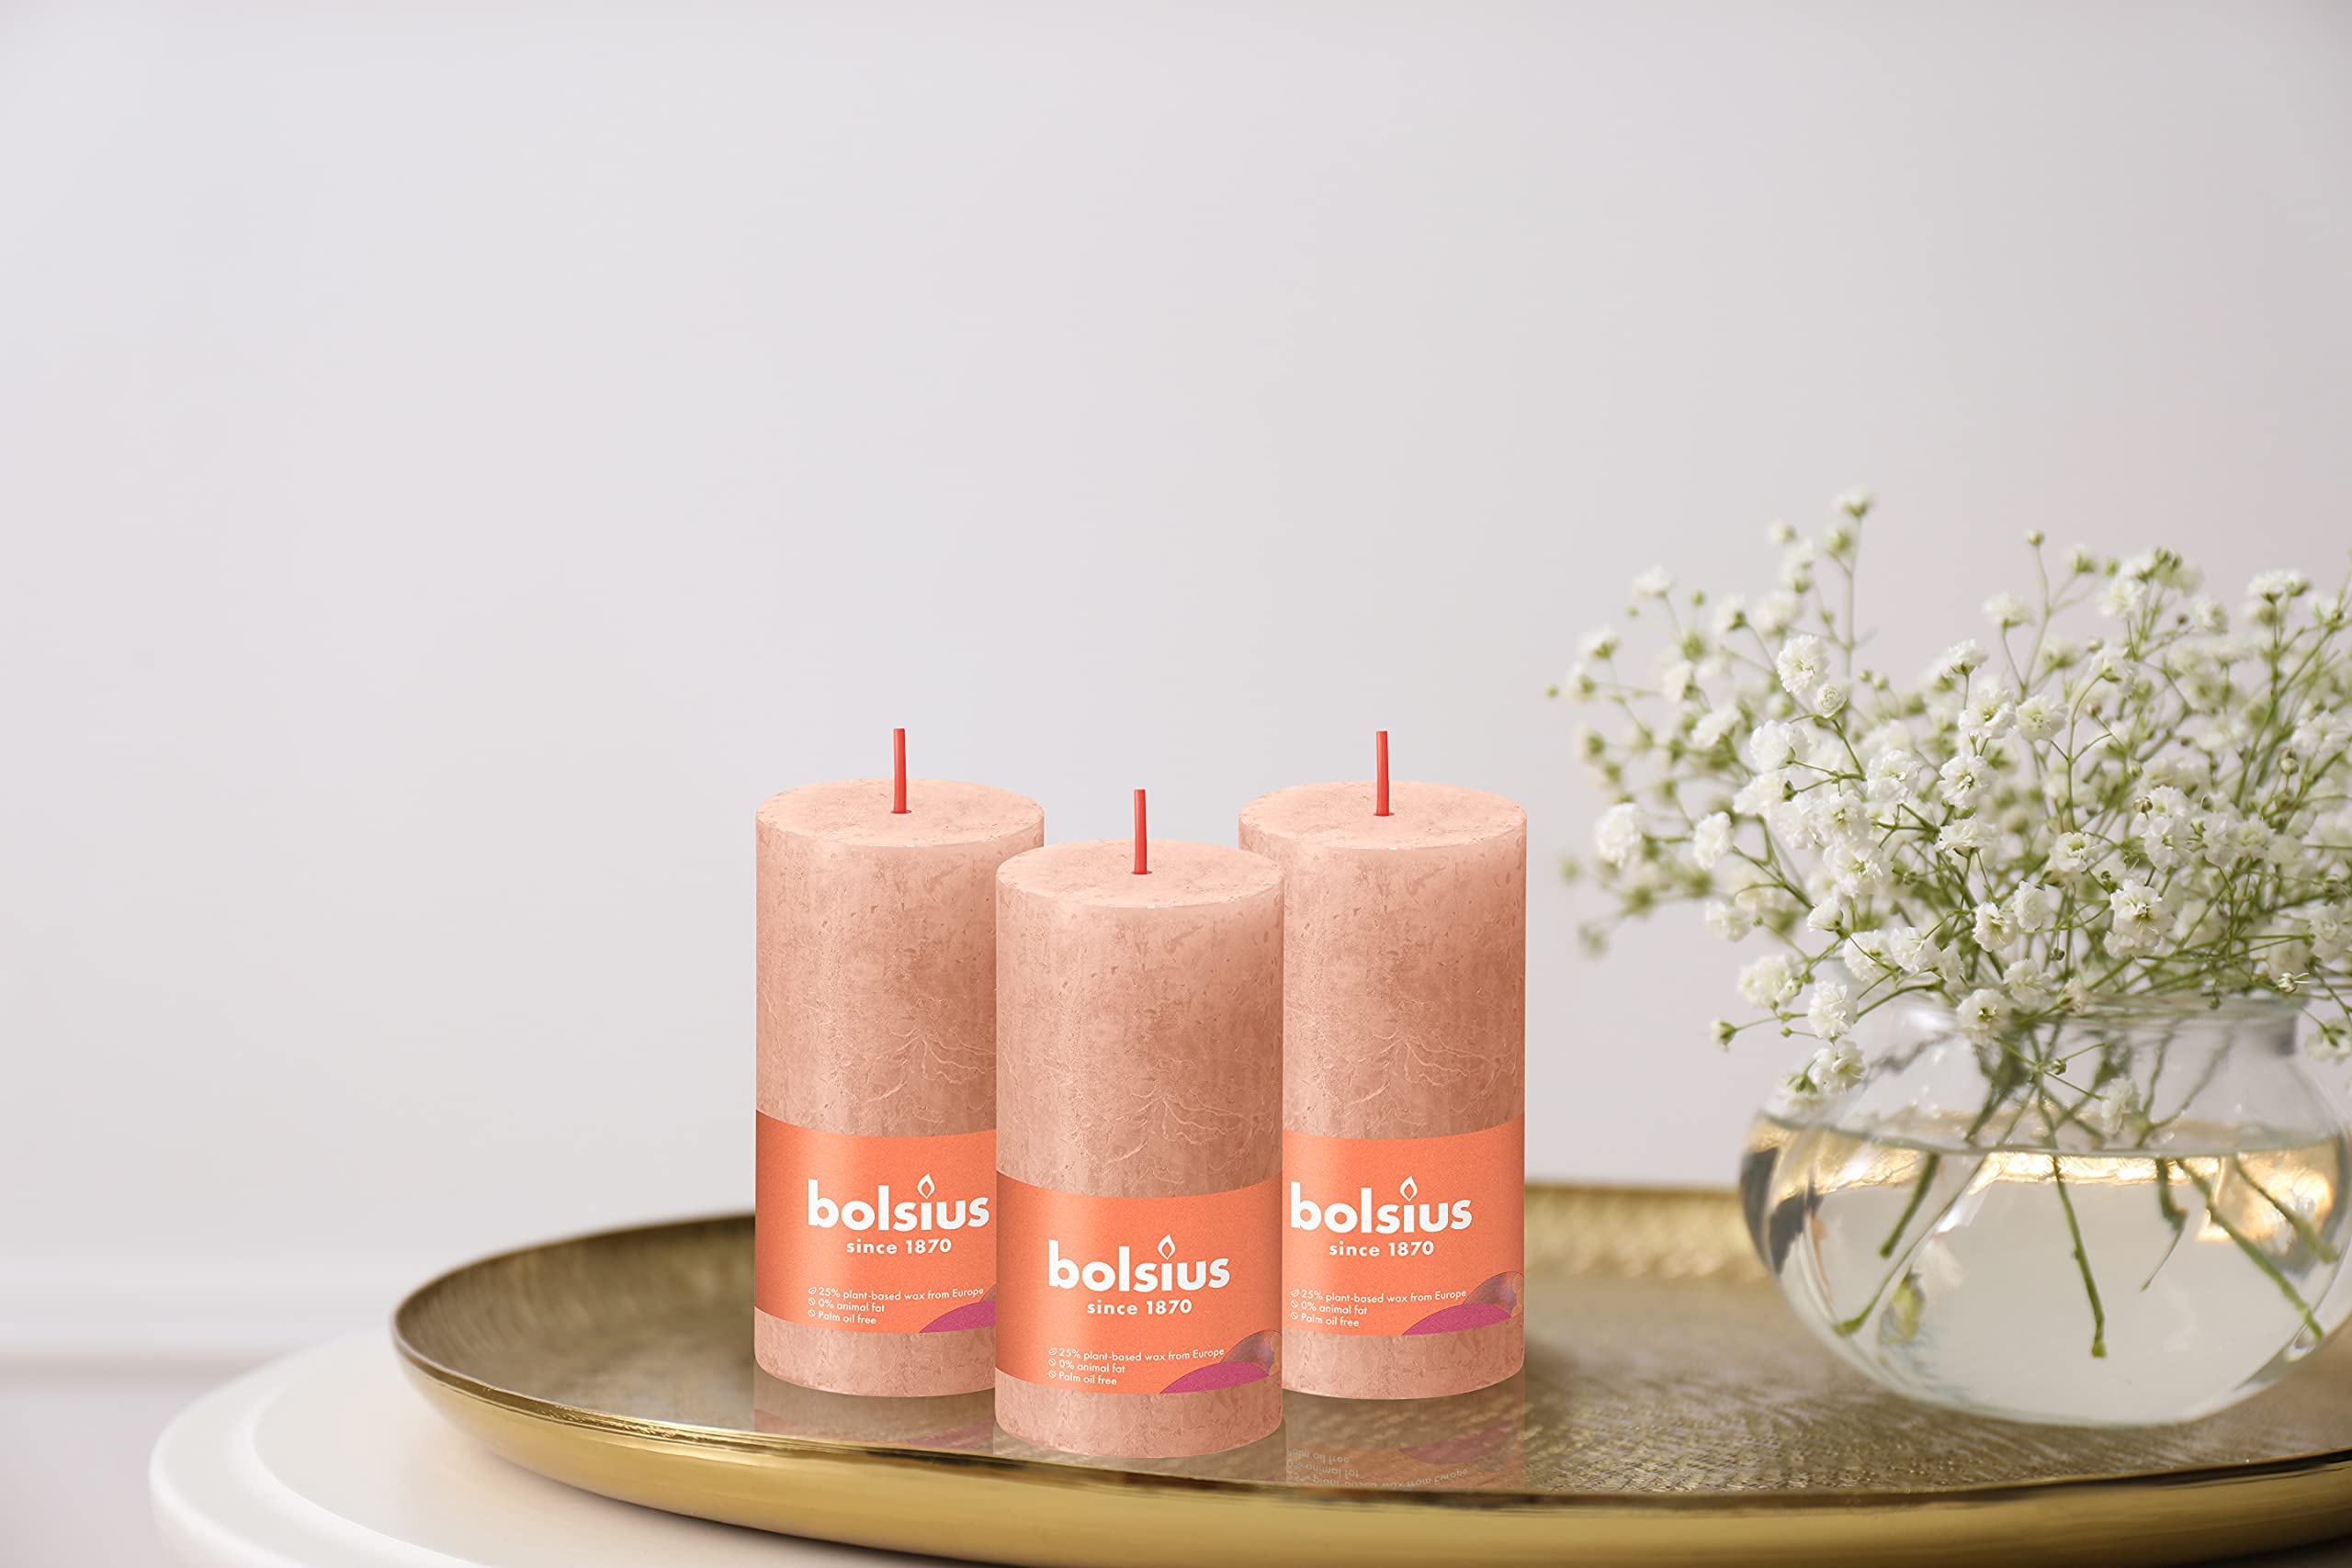 BOLSIUS 4 Pack Caramel Rustic Pillar Candles - 2 X 4 Inches - Premium European Quality - Includes Natural Plant-Based Wax - Unscented Dripless Smokeless 30 Hour Party D�cor and Wedding Candles  - Acceptable